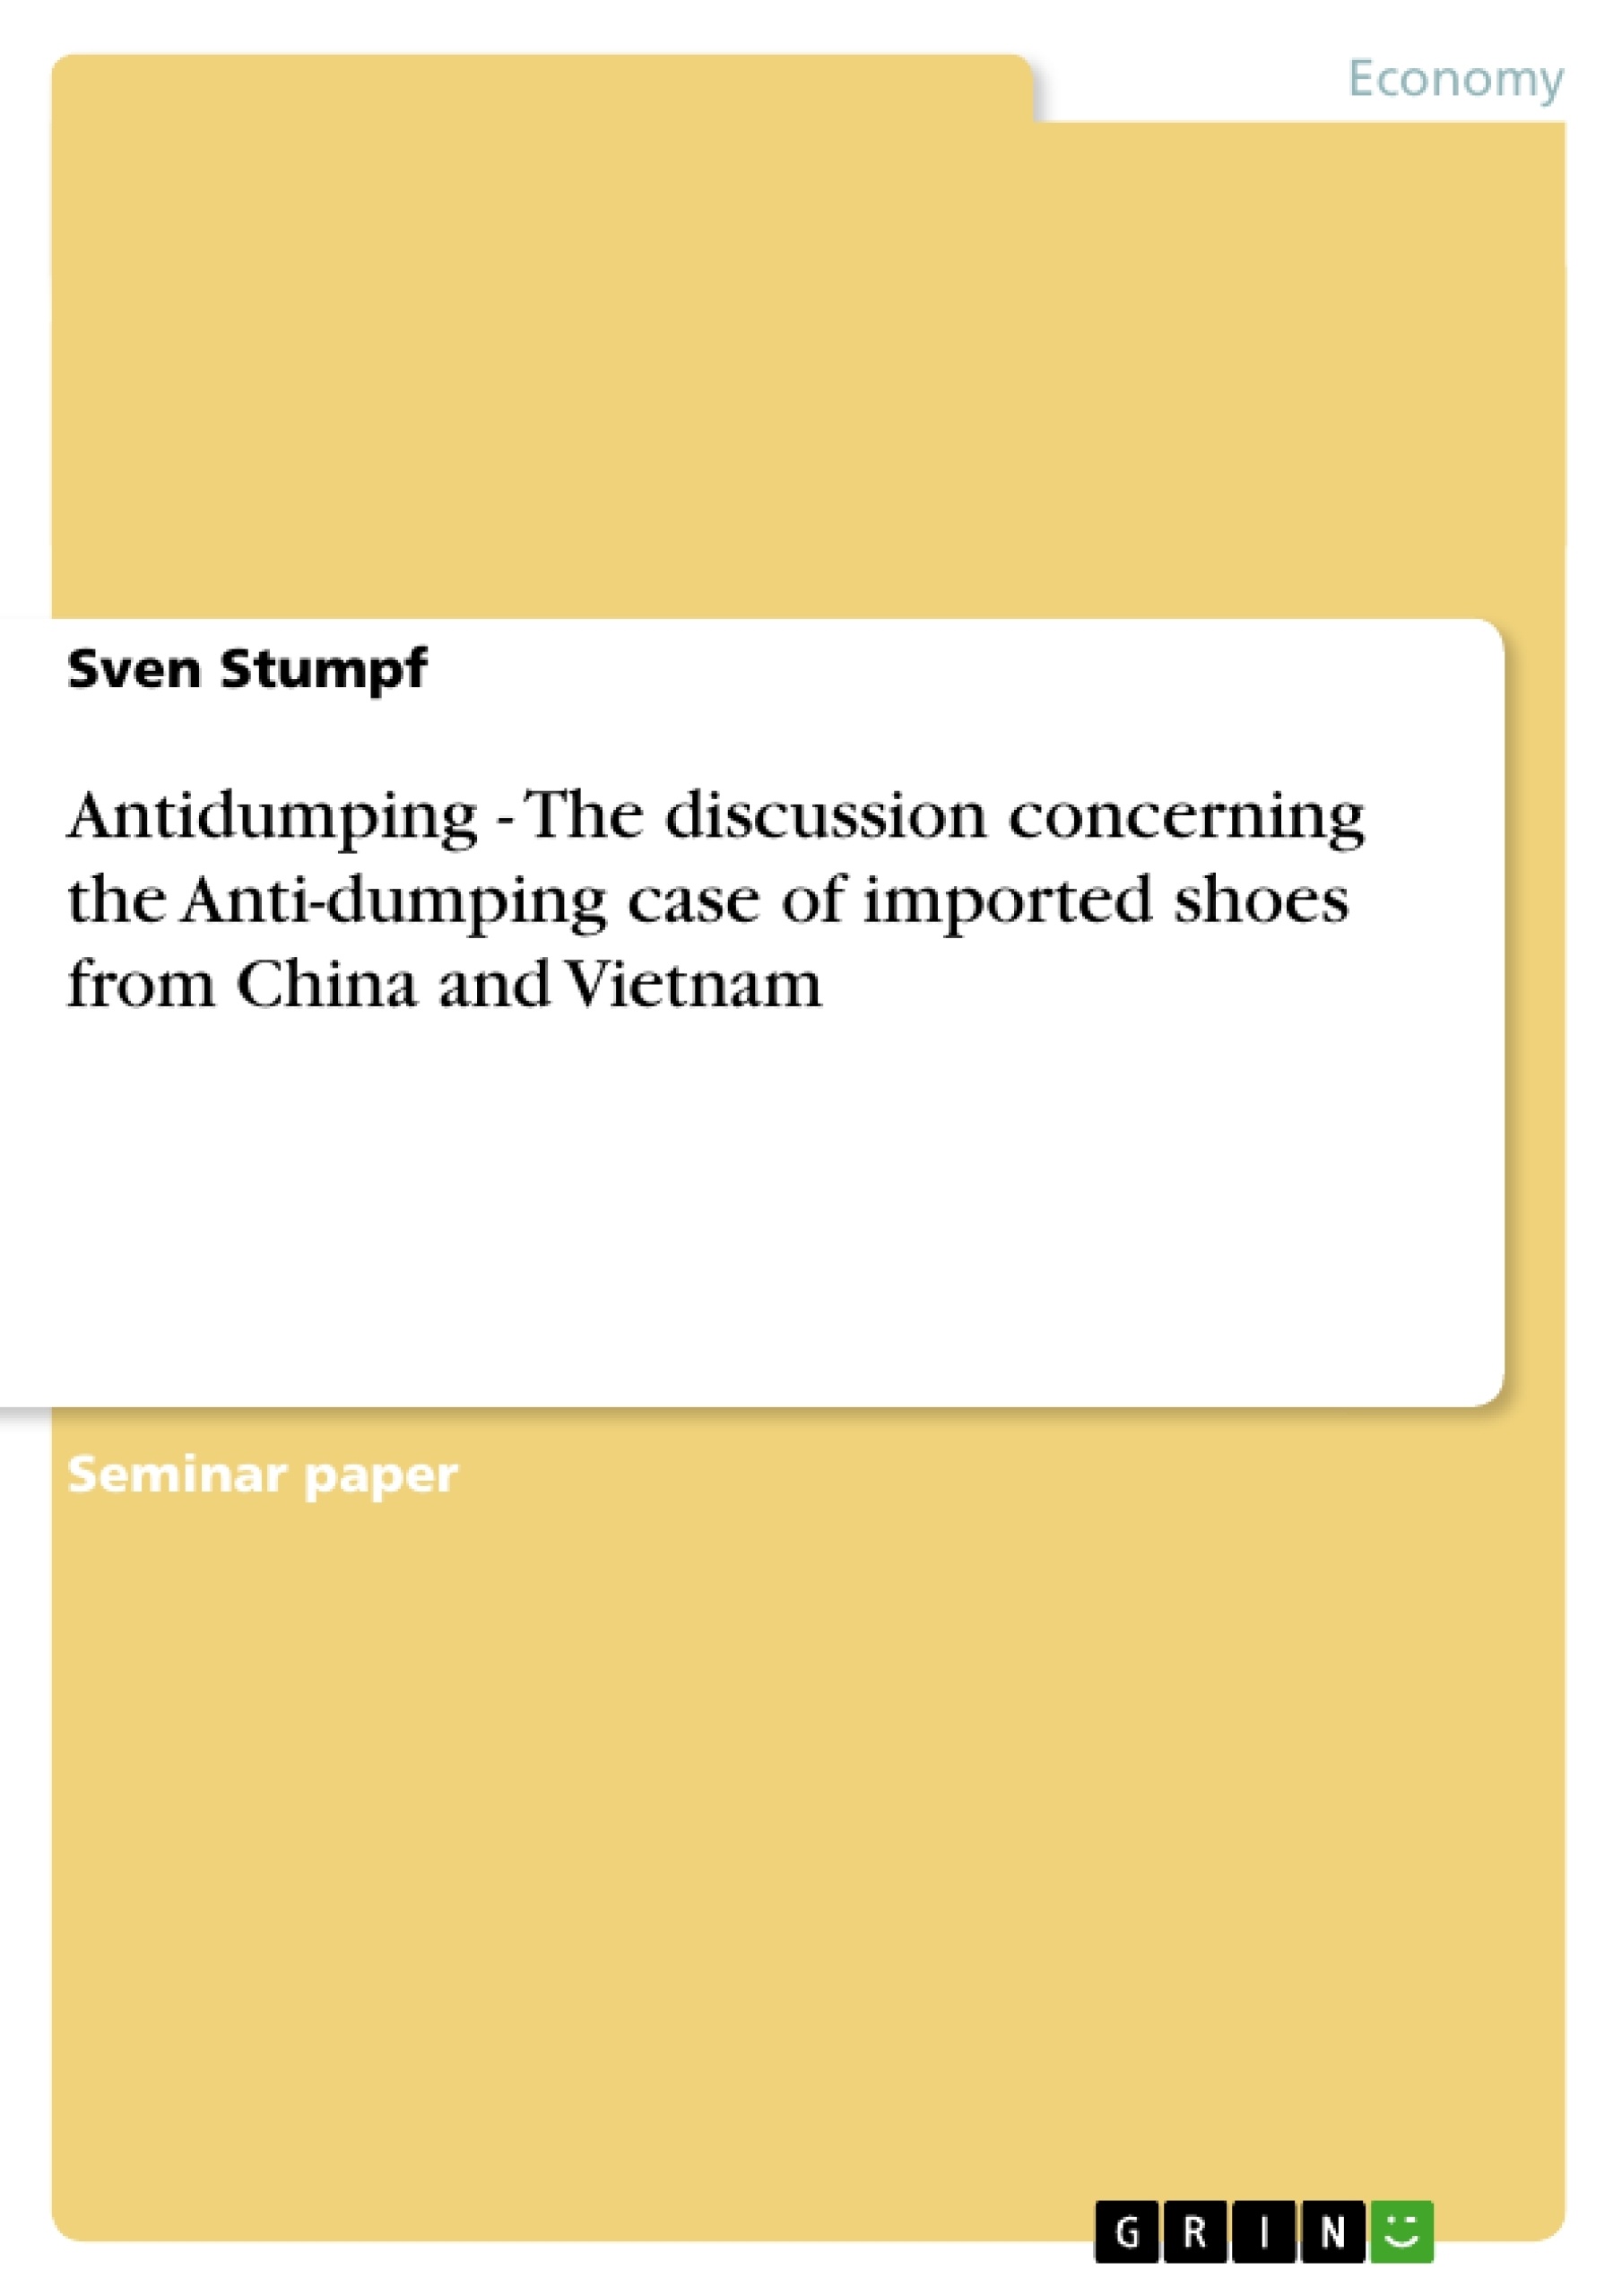 Title: Antidumping - The discussion concerning the Anti-dumping case of imported shoes from China and Vietnam 